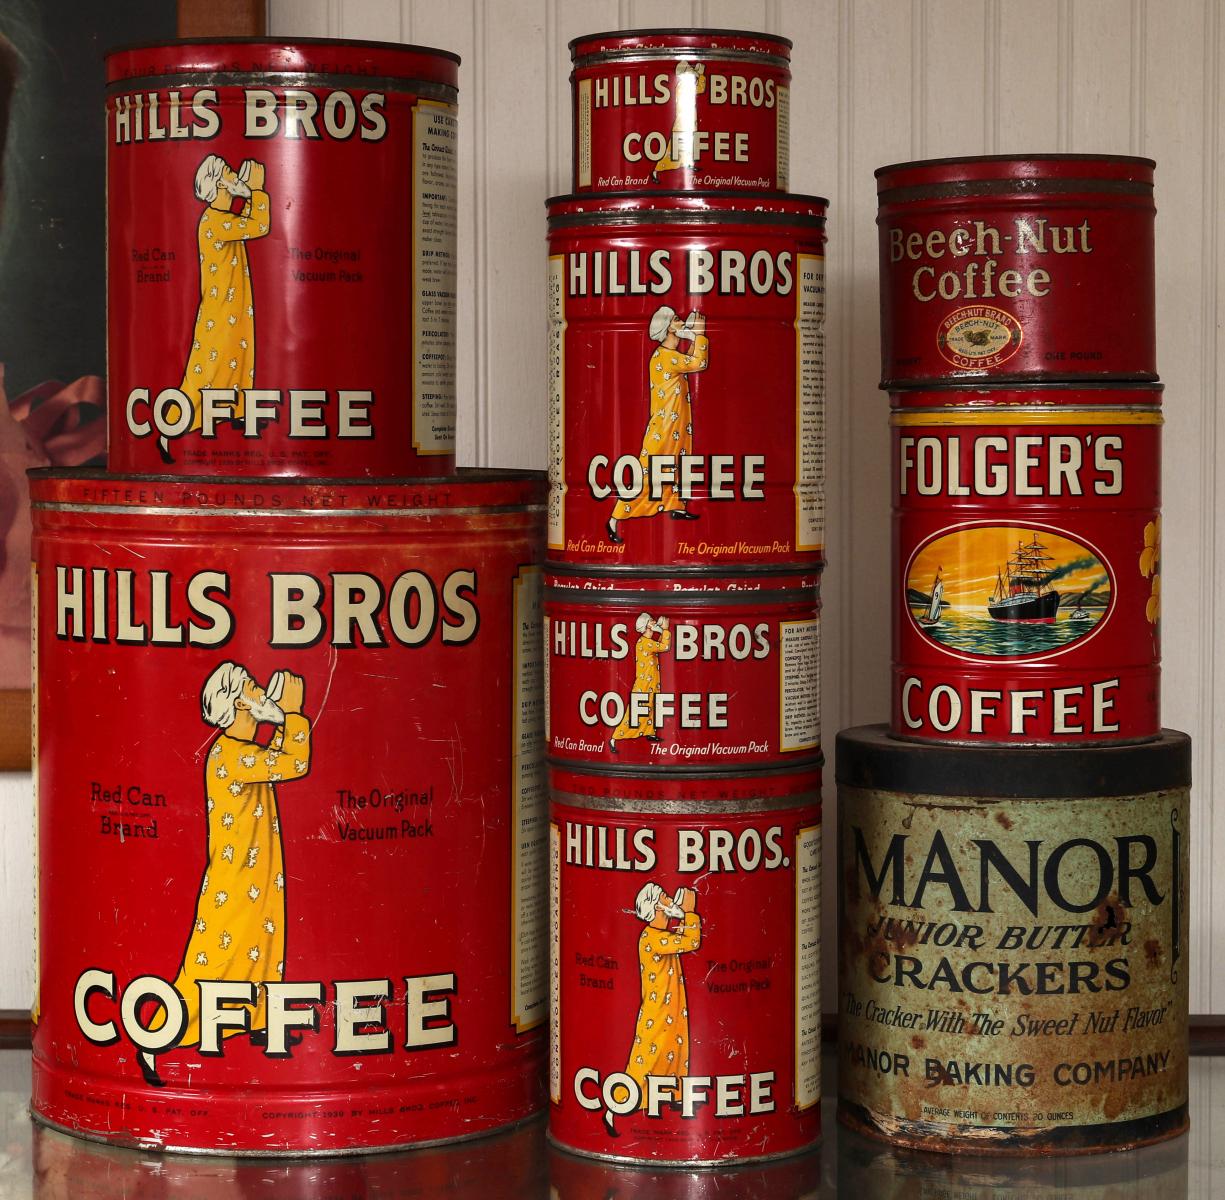 HILLS BROS COFFEE CANS 15 LB CAN TO 1 LB CAN SIZES